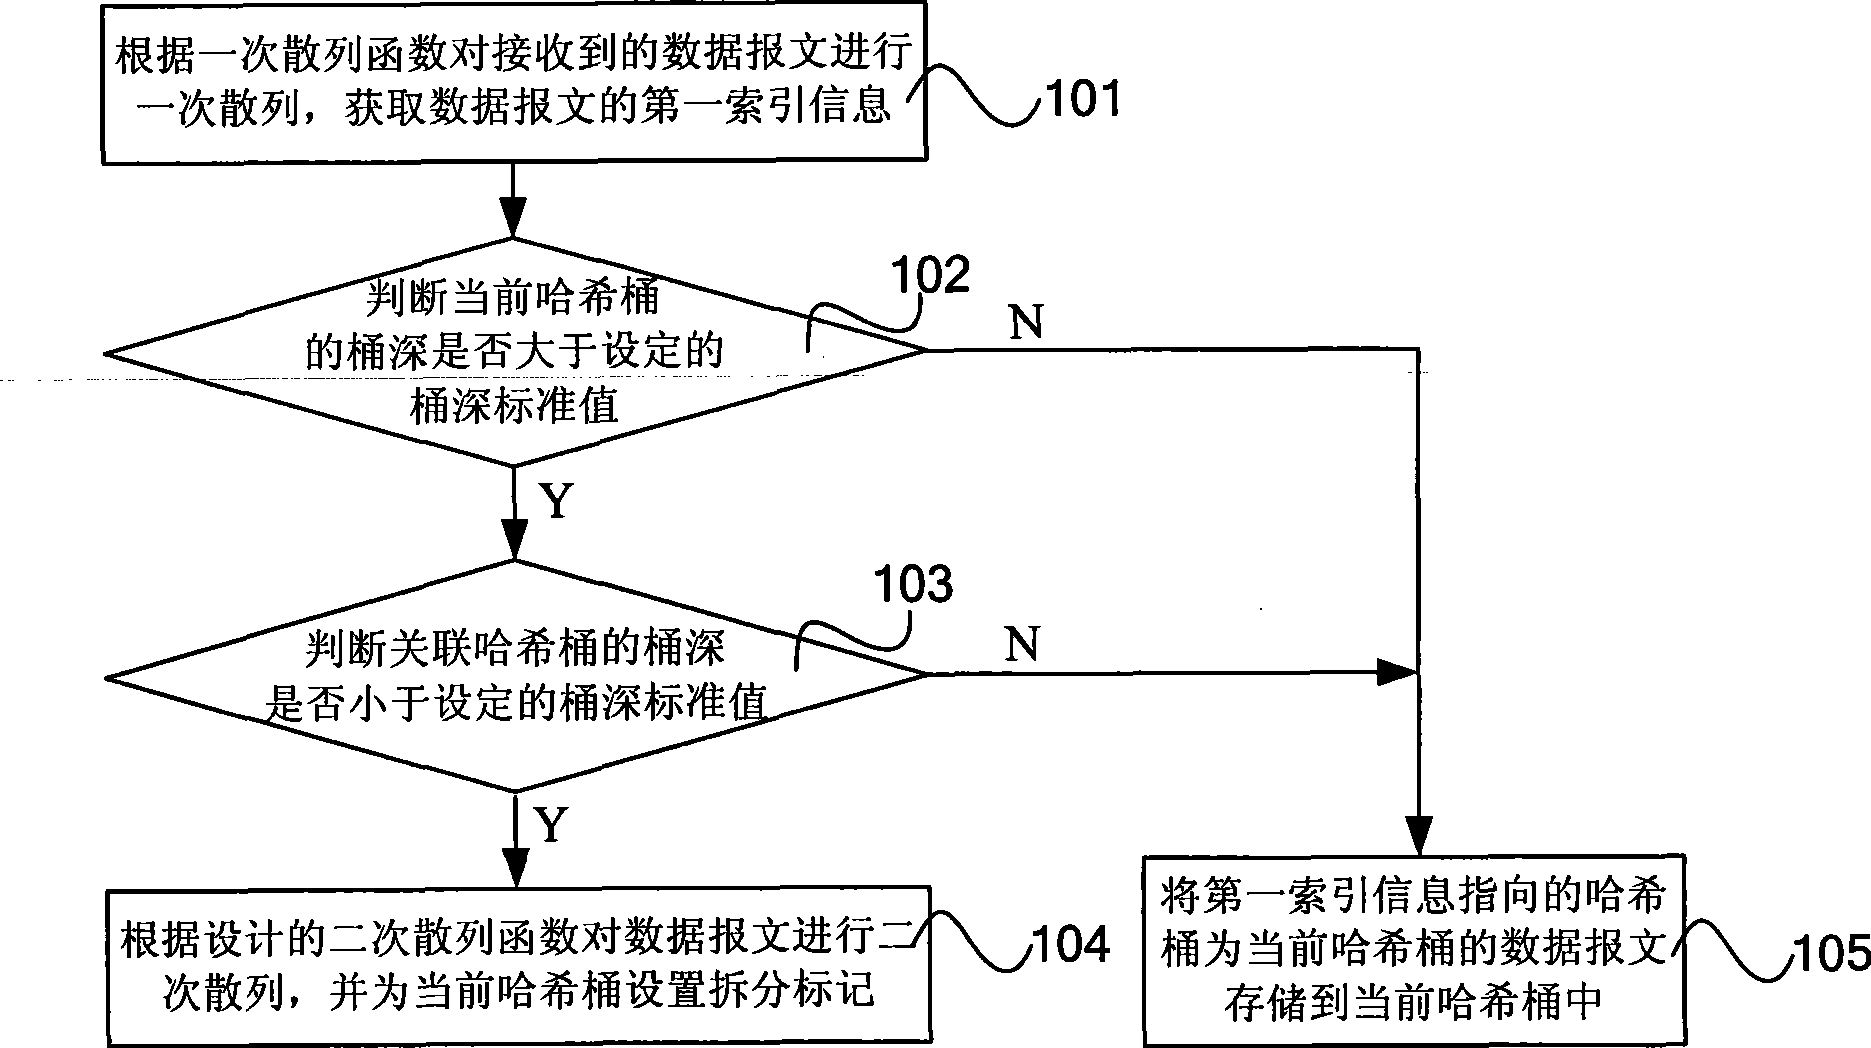 Storing, searching method and apparatus for data packet